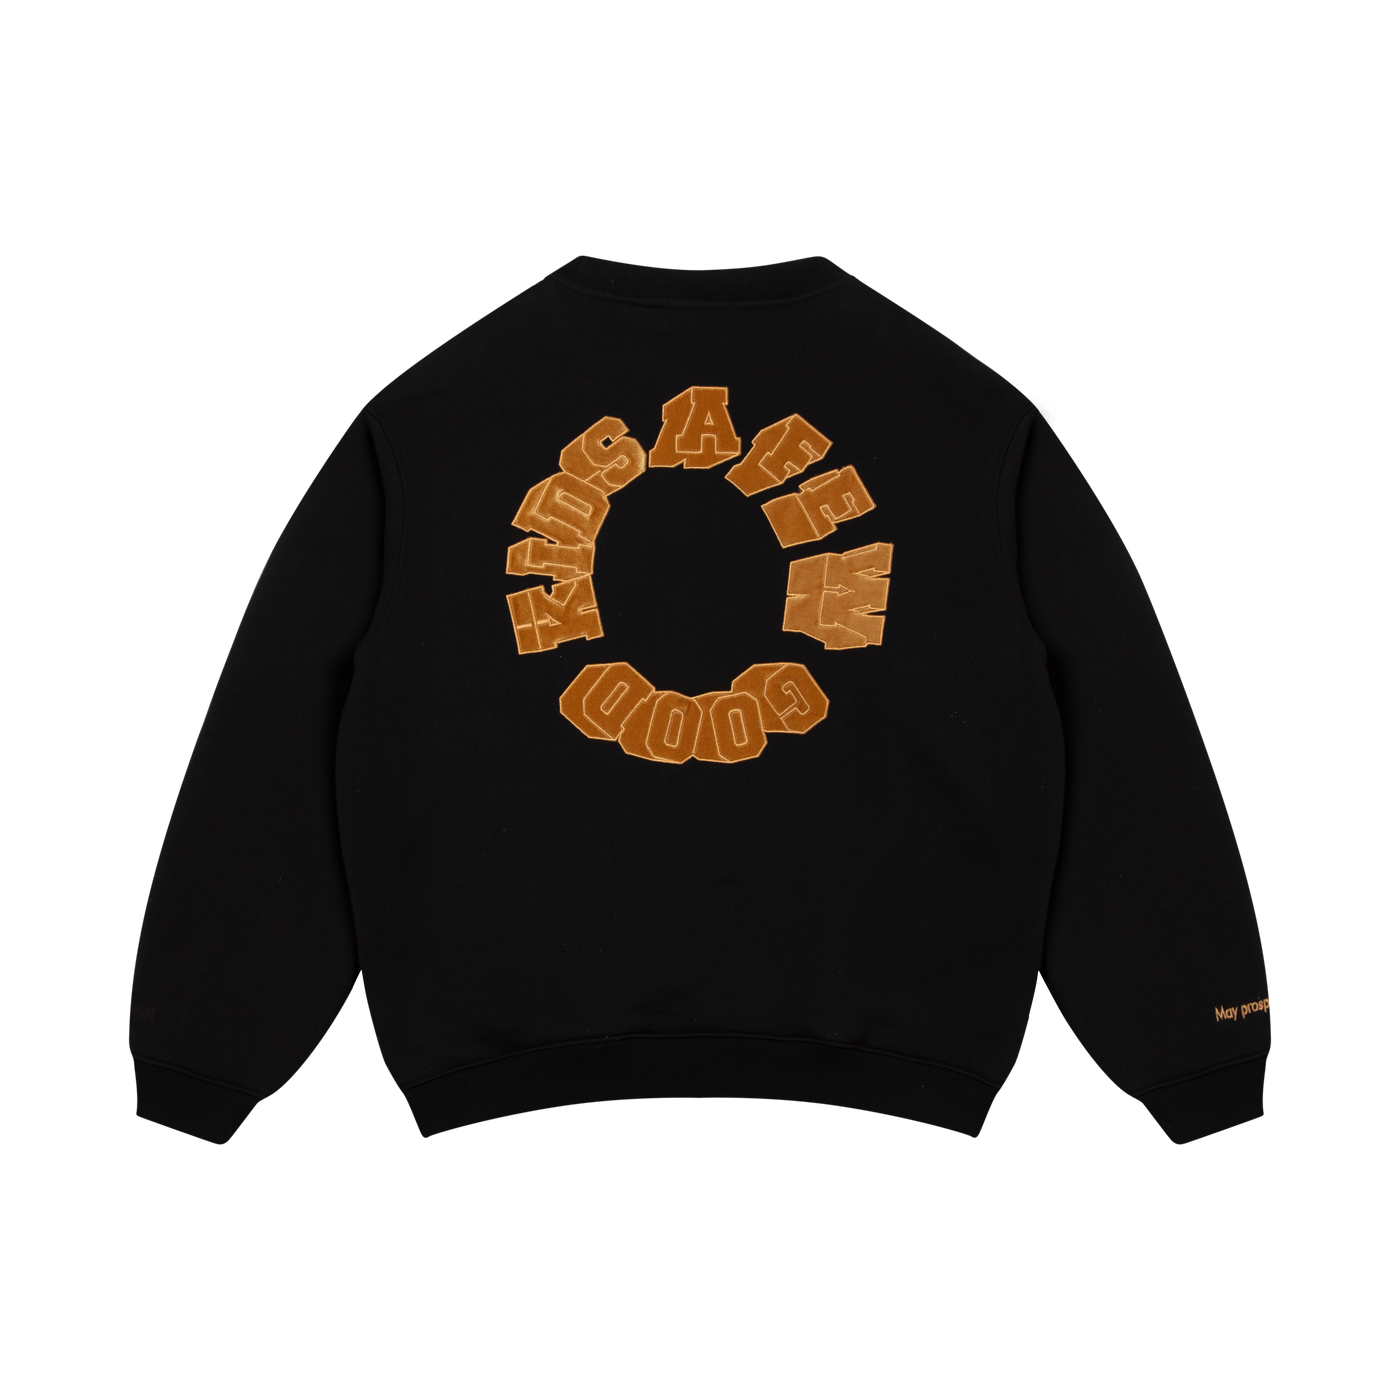 DONCARE(AFGK) "Year of the rabbit exclusive sweater"